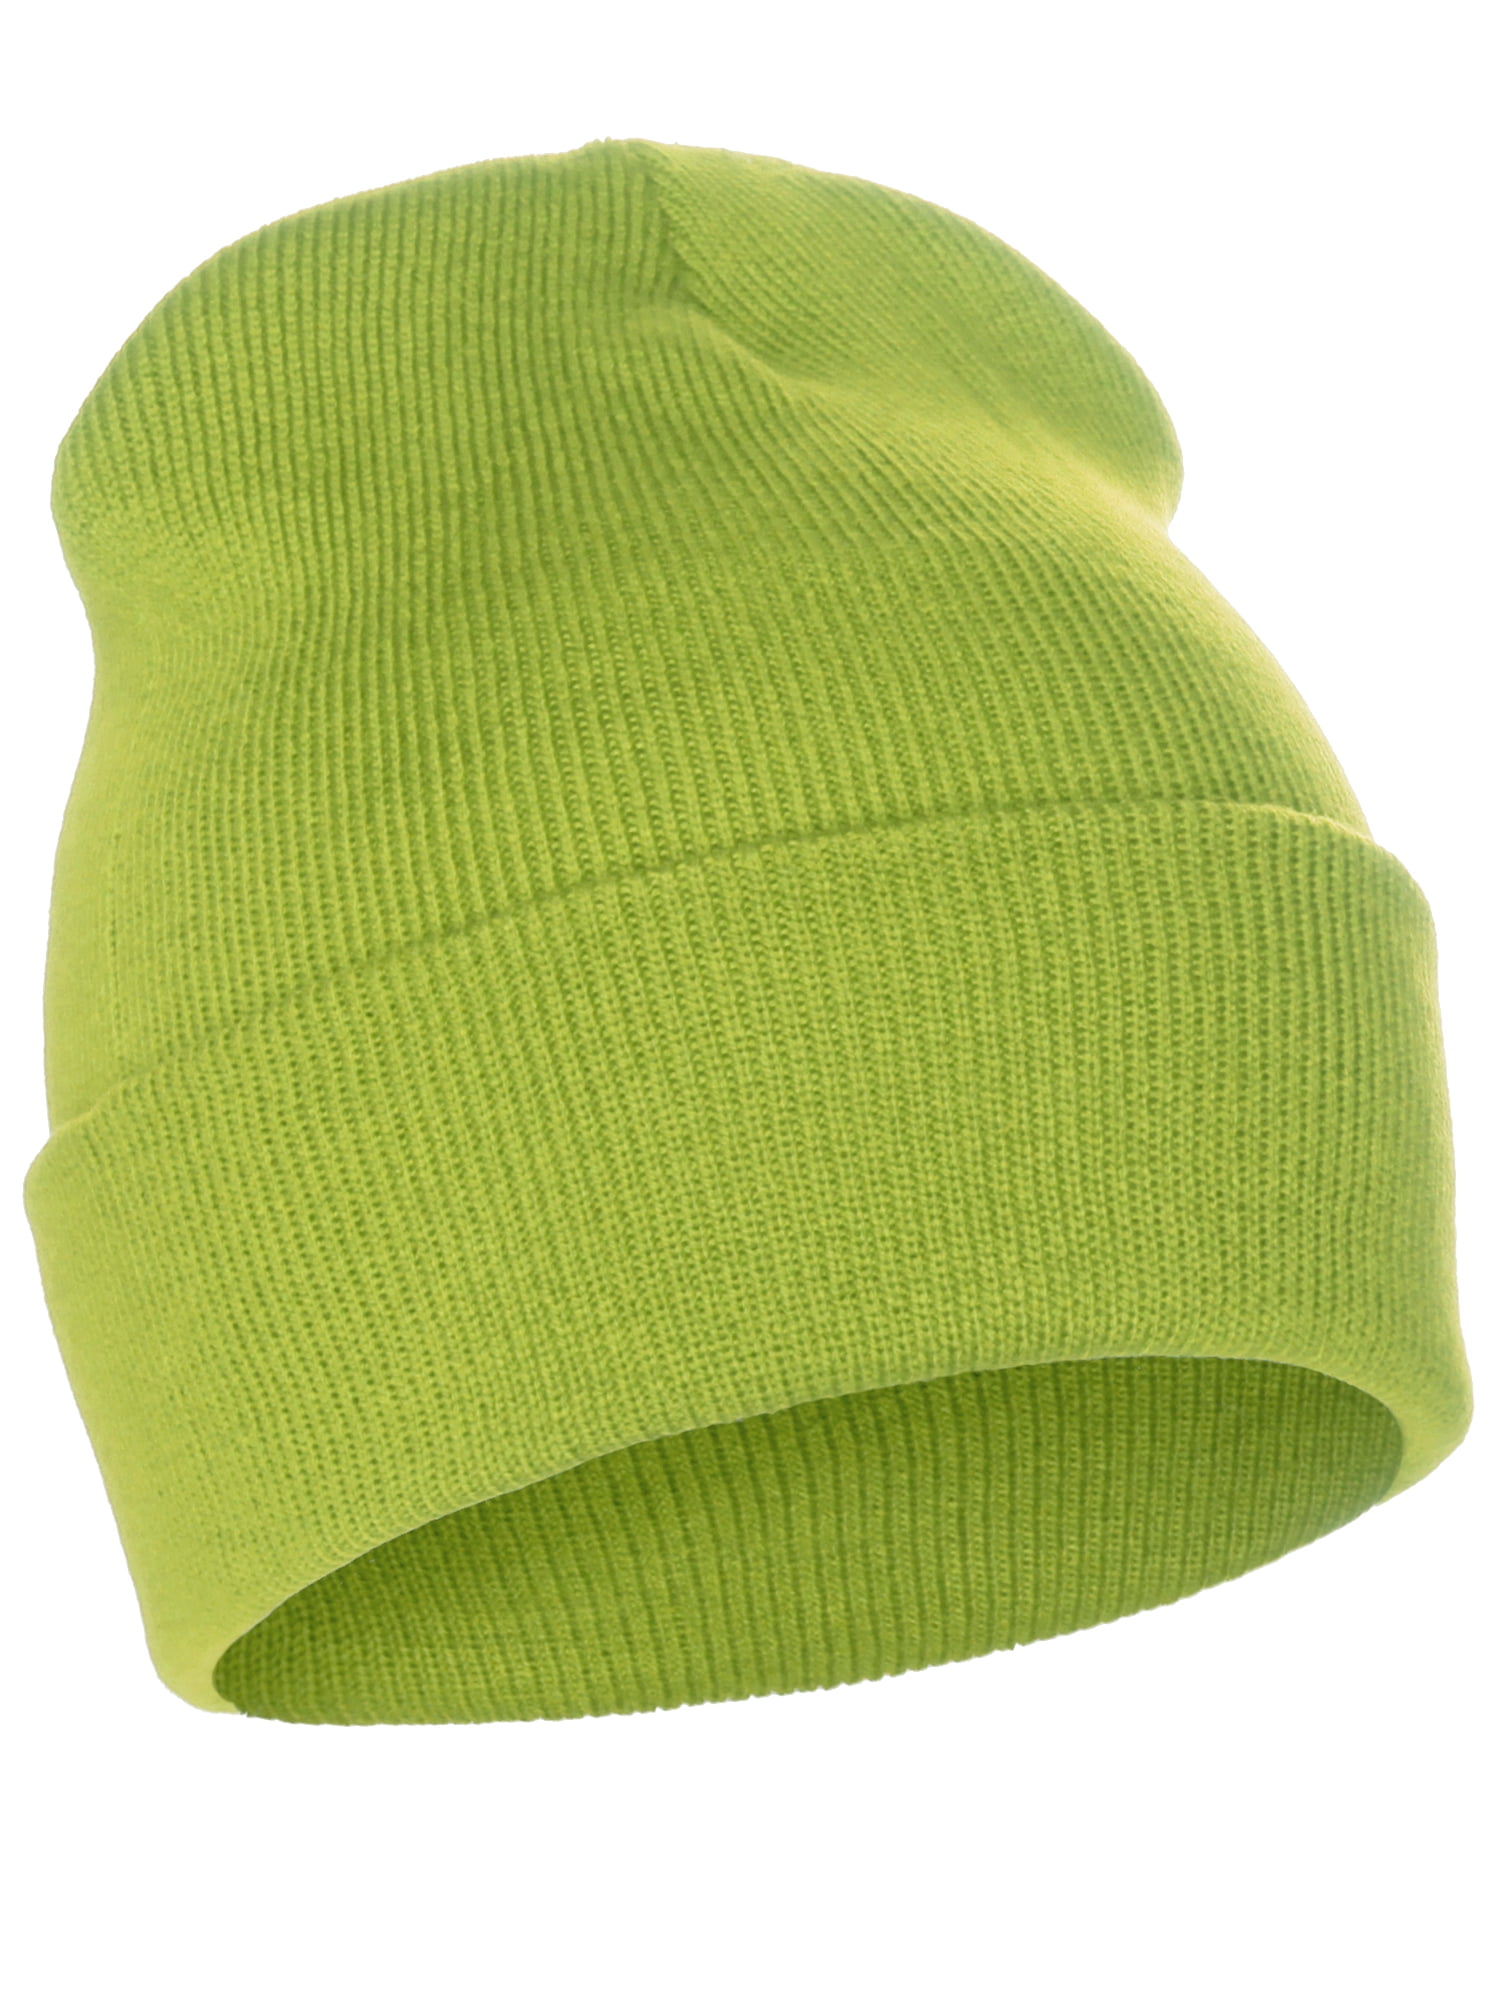 Classic Plain Cuffed Beanie Winter Knit Hat Skully Cap, Turquoise